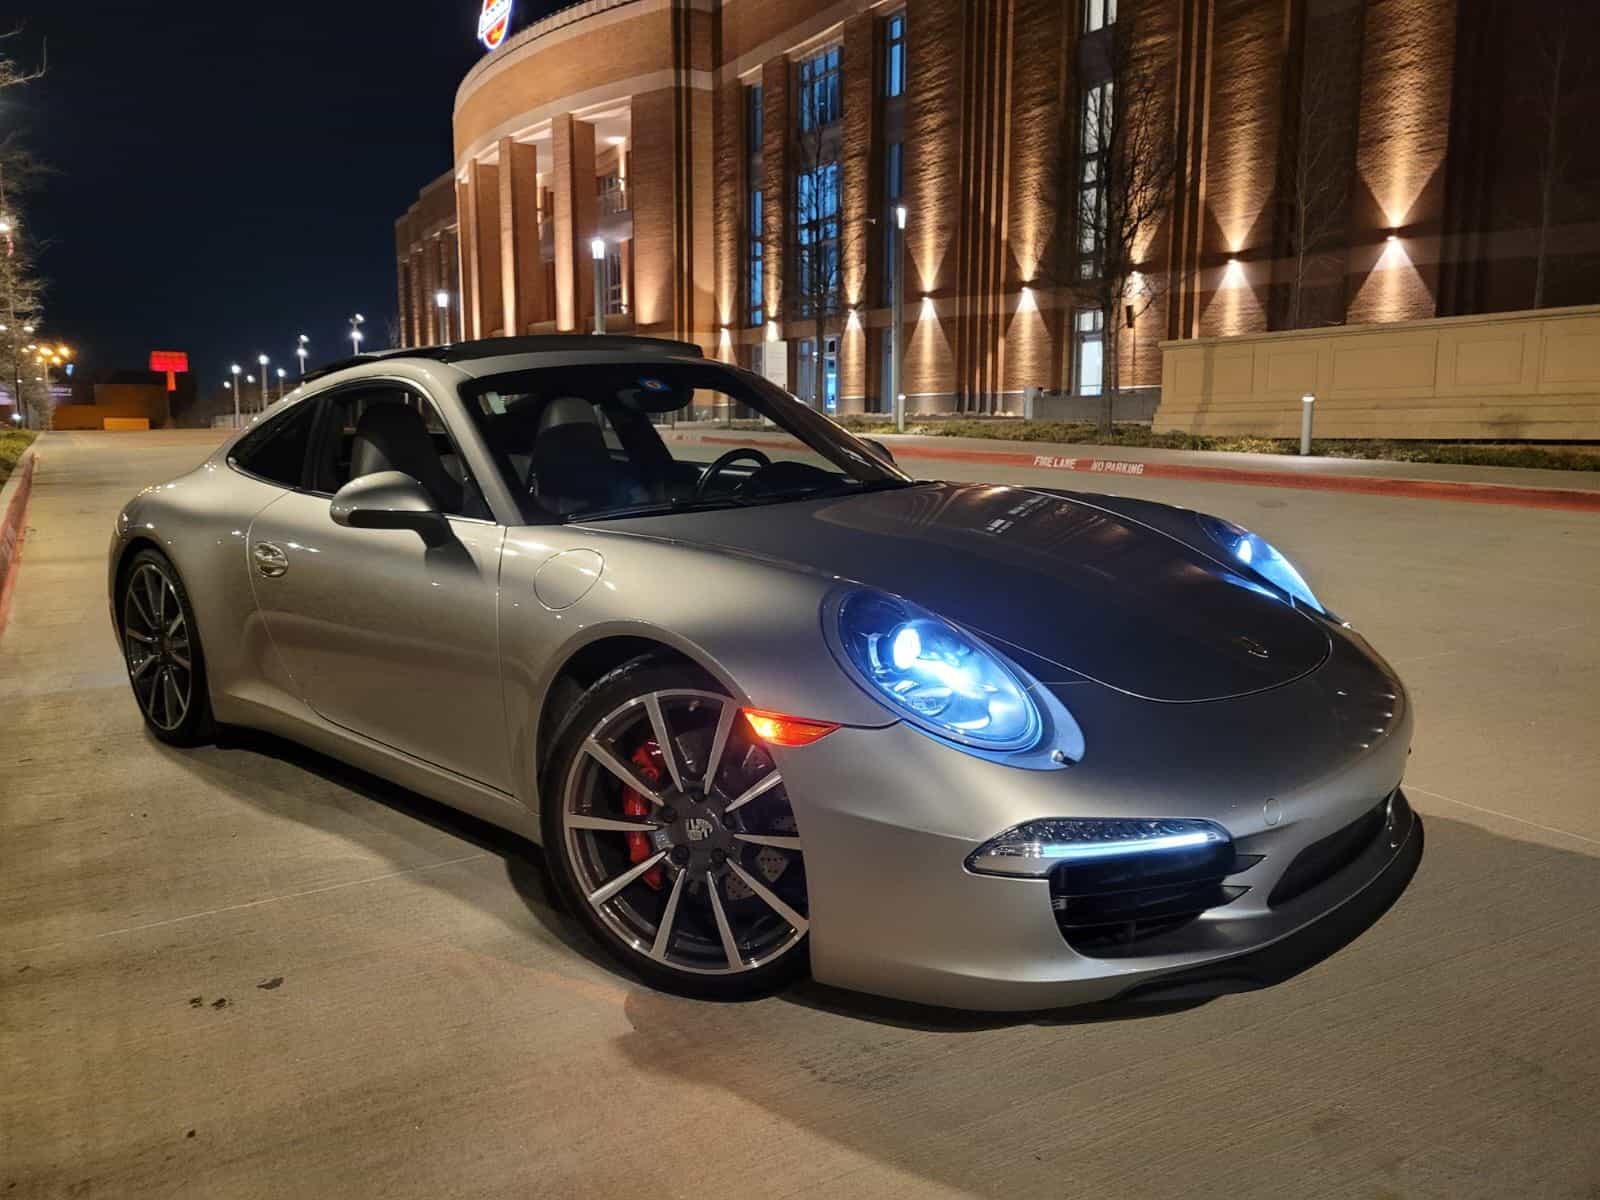 2012 Porsche 911 - BUILT 2012 991 S! - Used - VIN WP0AB2A90CS121711 - 65,000 Miles - 6 cyl - 2WD - Automatic - Coupe - Silver - Arlington, TX 76013, United States